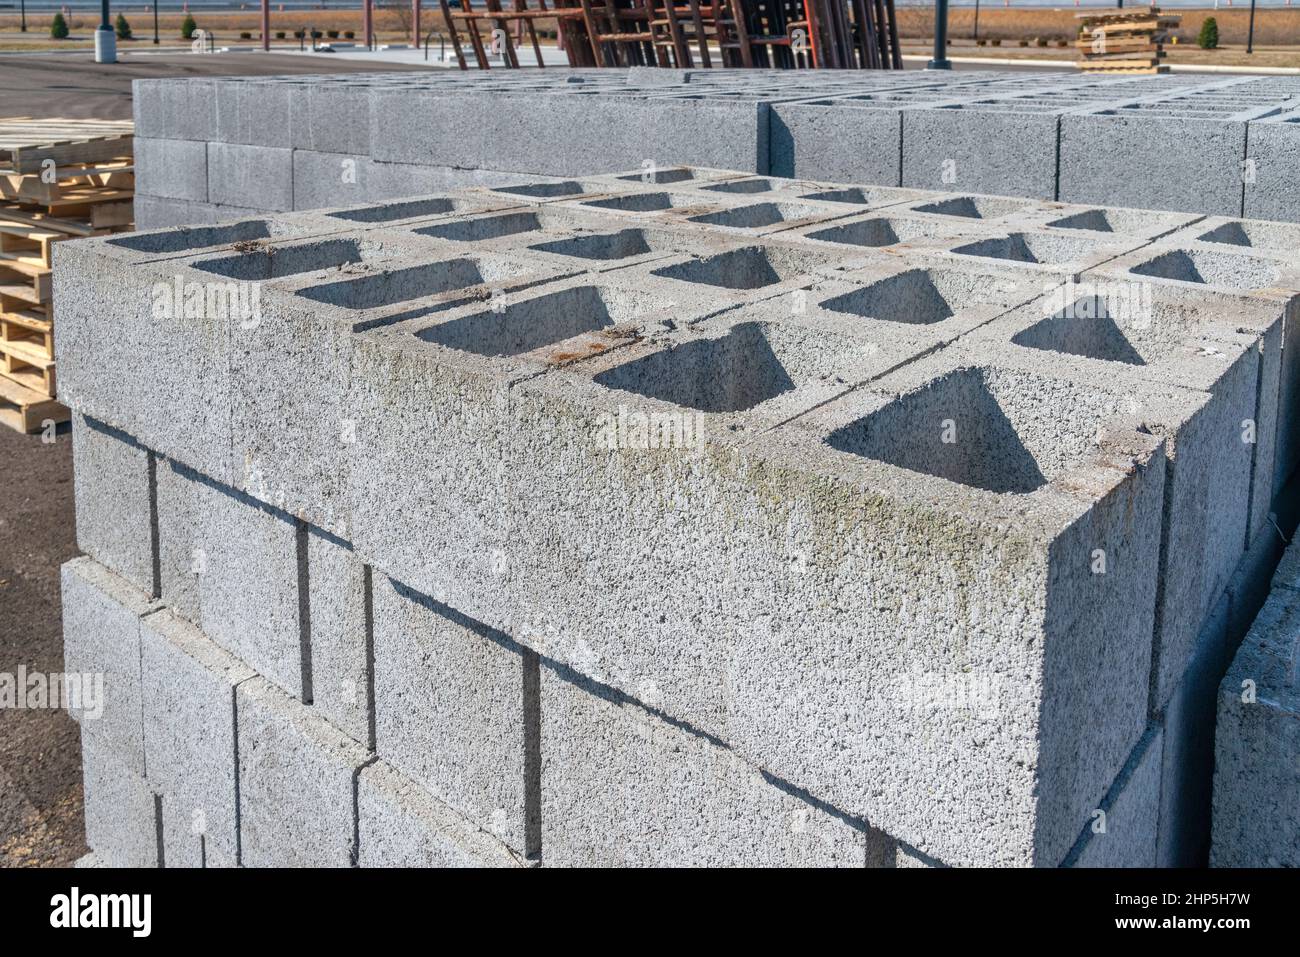 Horizontal shot of stacks of cinder blocks and other building materials at a construction site. Stock Photo